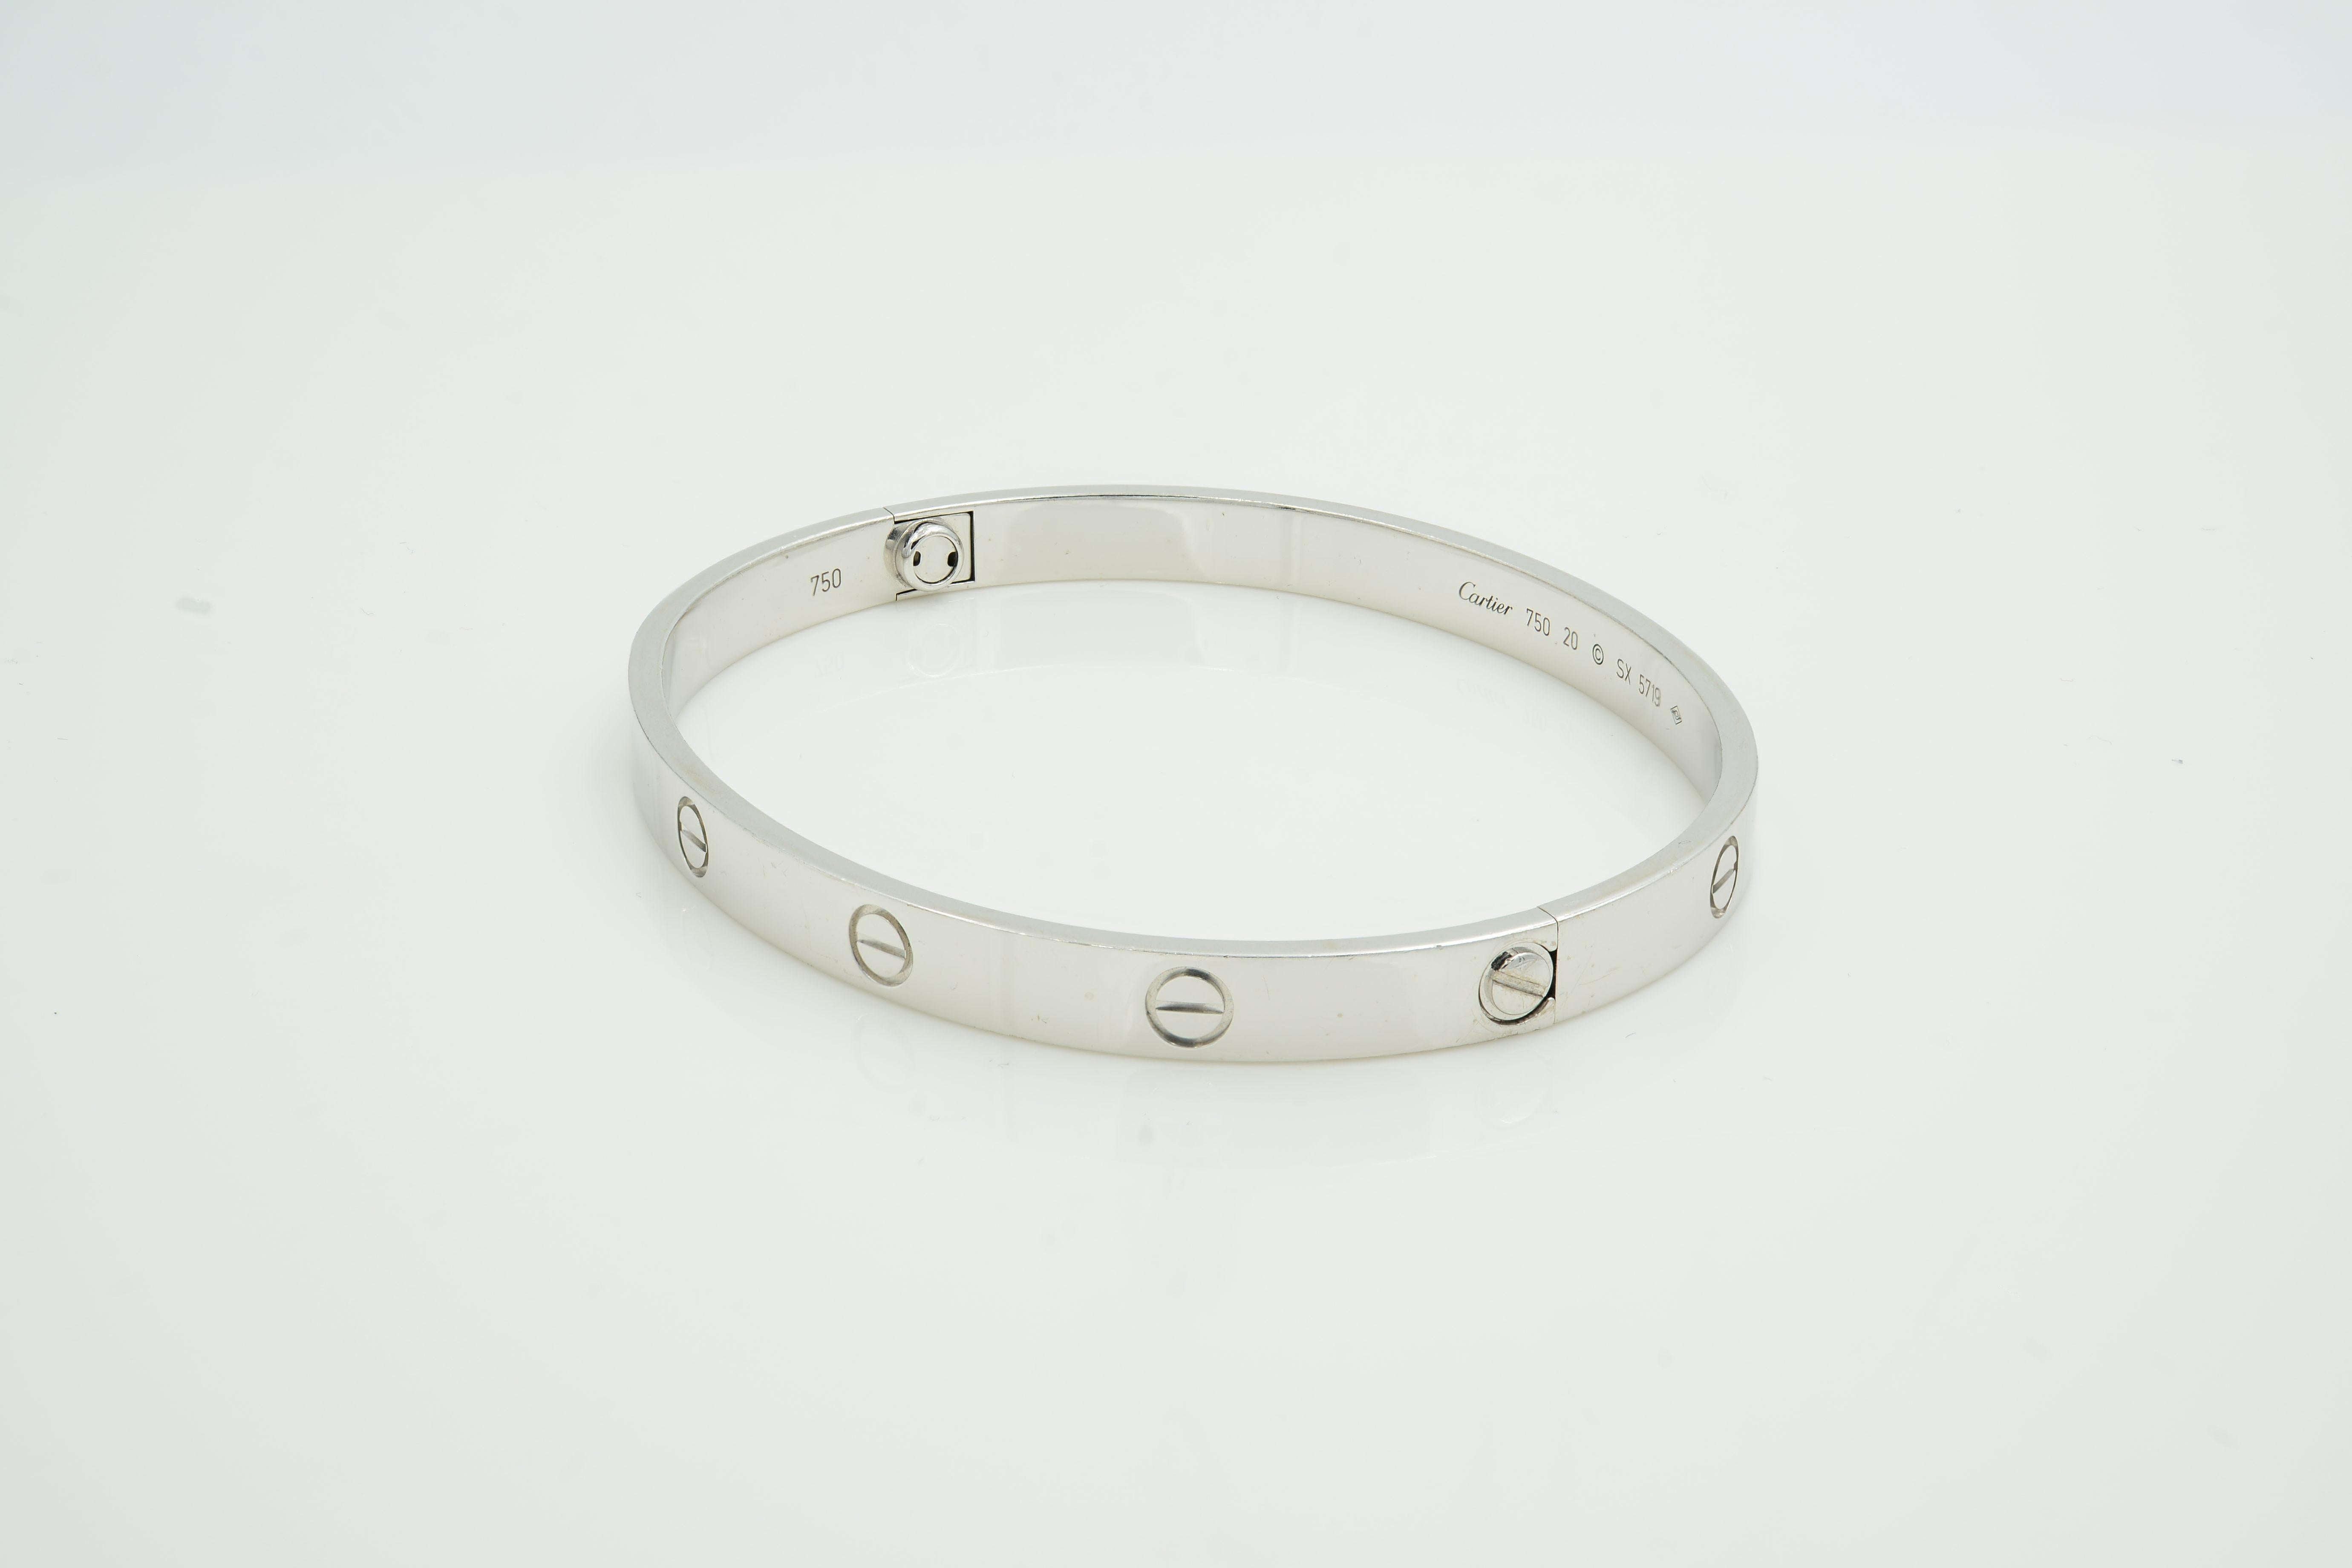 100% Authentic Cartier Love Bracelet Size 20 18K White Gold. 
Comes with original Cartier box screwdriver but no papers. 
Metal Type: 18K Gold
Hallmark: 750, Serial Number 
Metal Finish: High Polish
Collection: Love
Condition: Very good. 
New screw